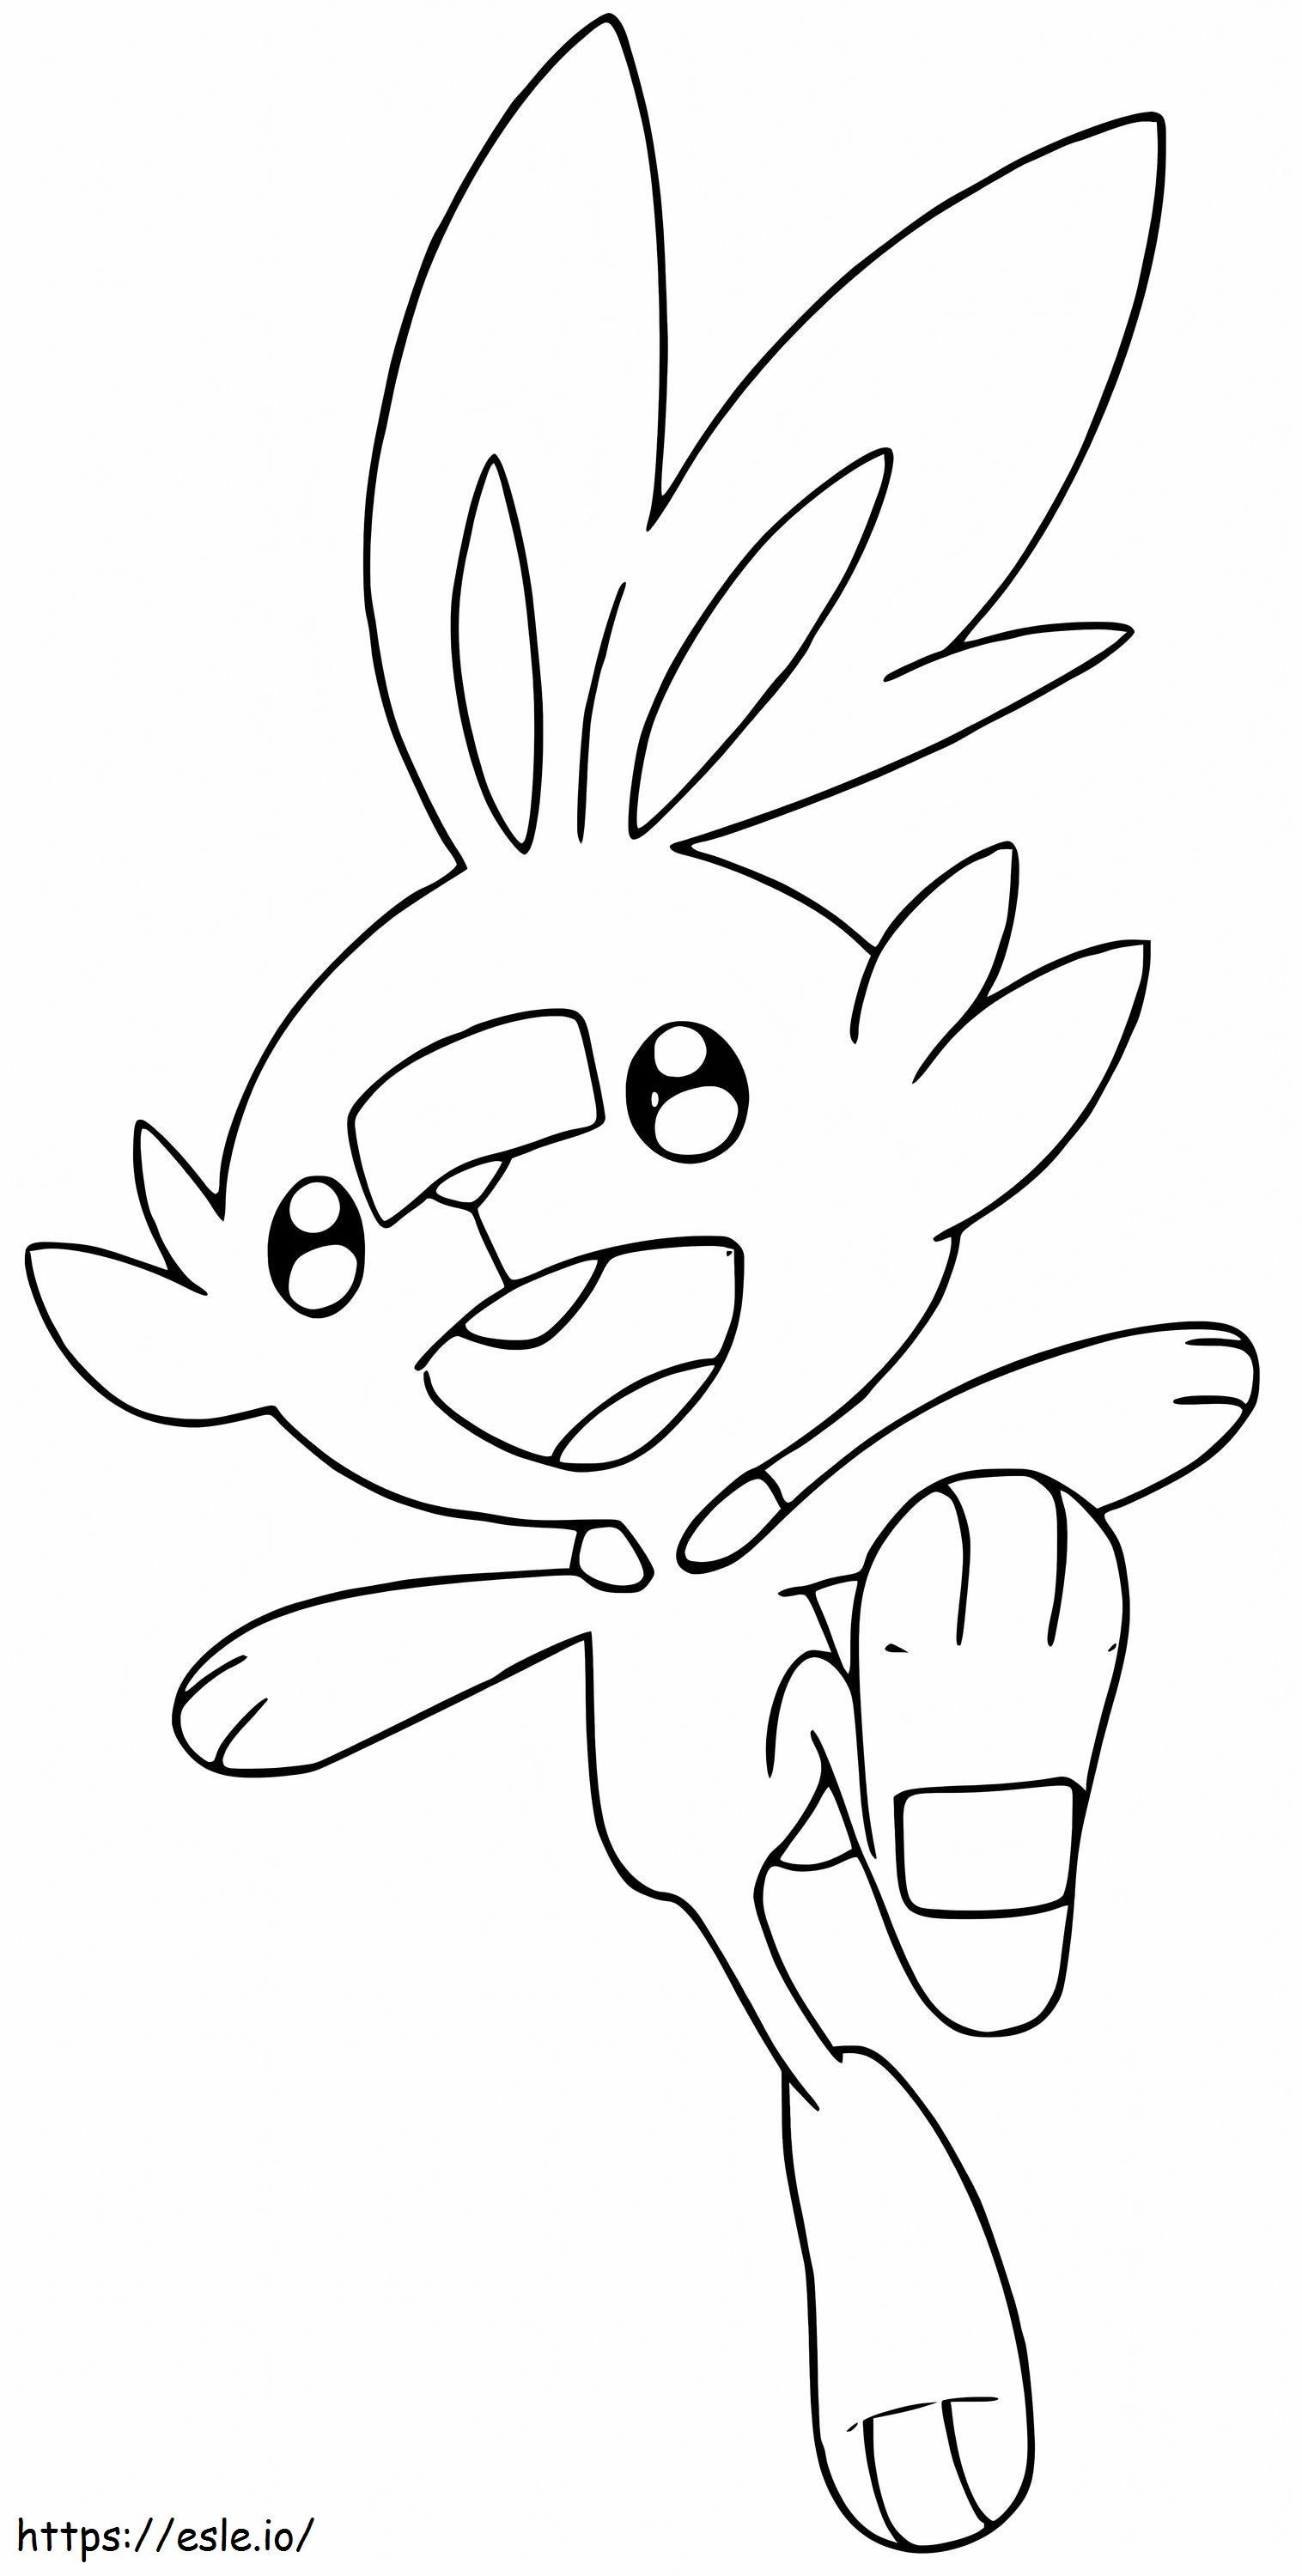 Raboot 5 coloring page